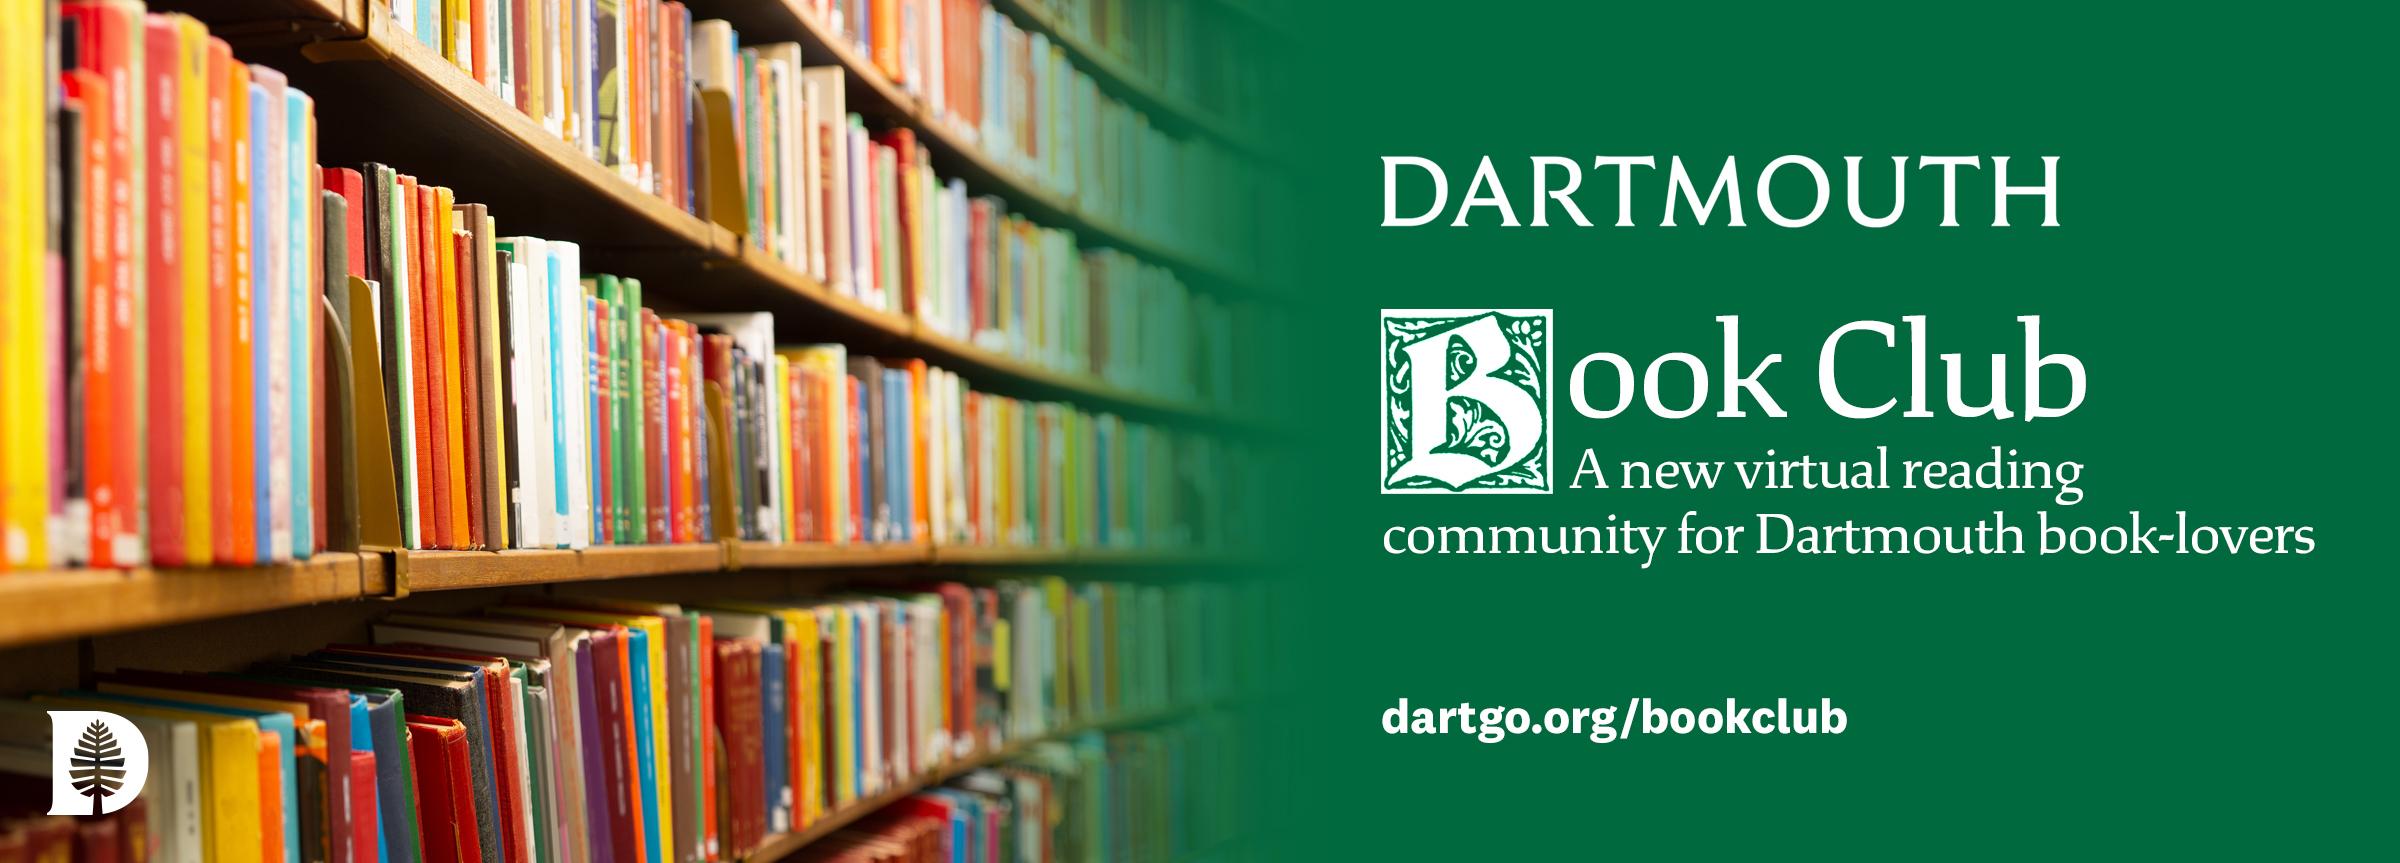 Banner promotion for Dartmouth book club with photo of bookshelves